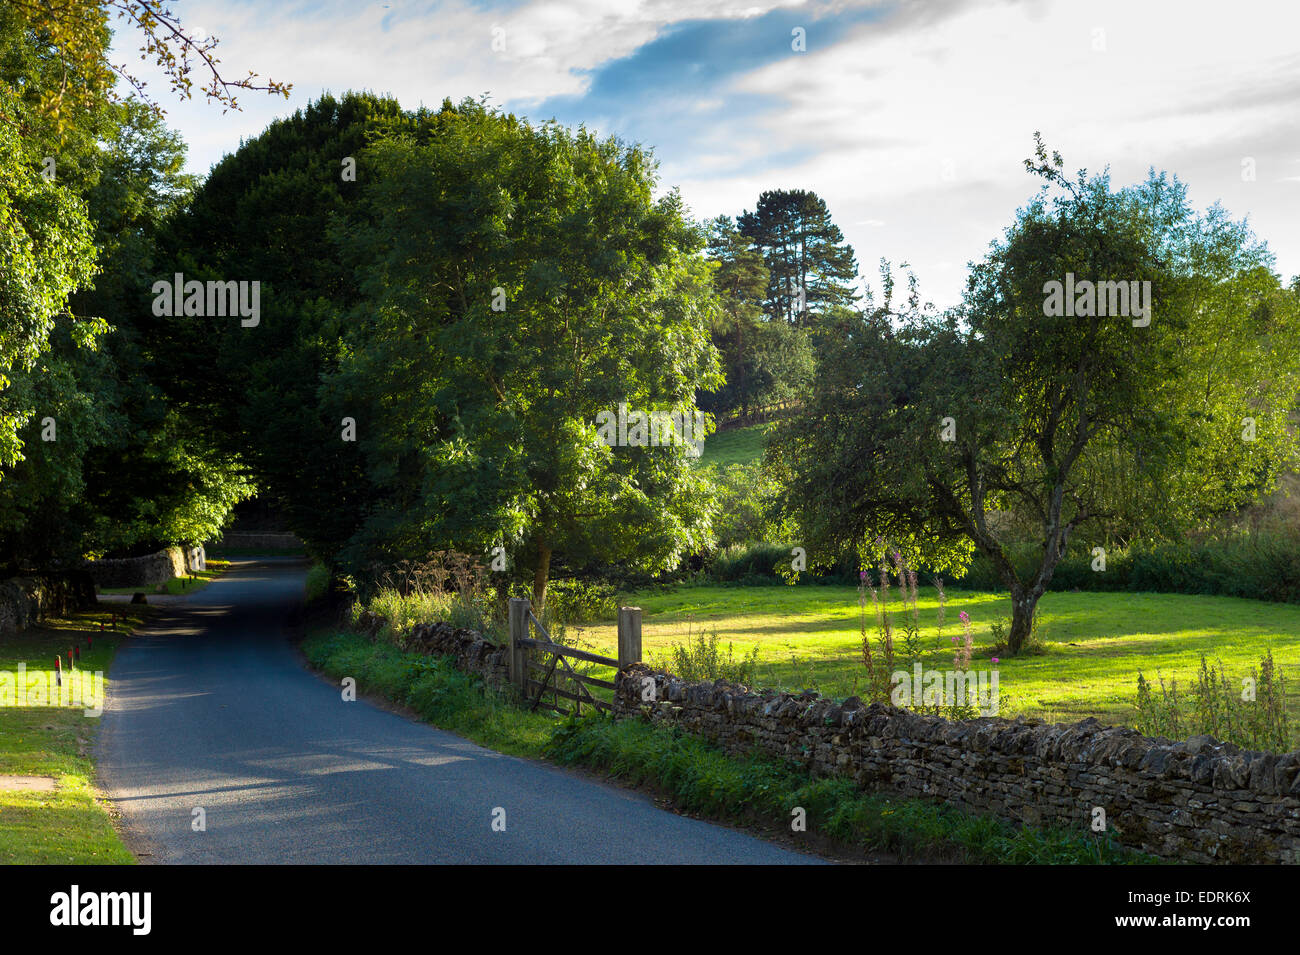 Country lane rural scene in Swinbrook in The Cotswolds, England, United Kingdom Stock Photo